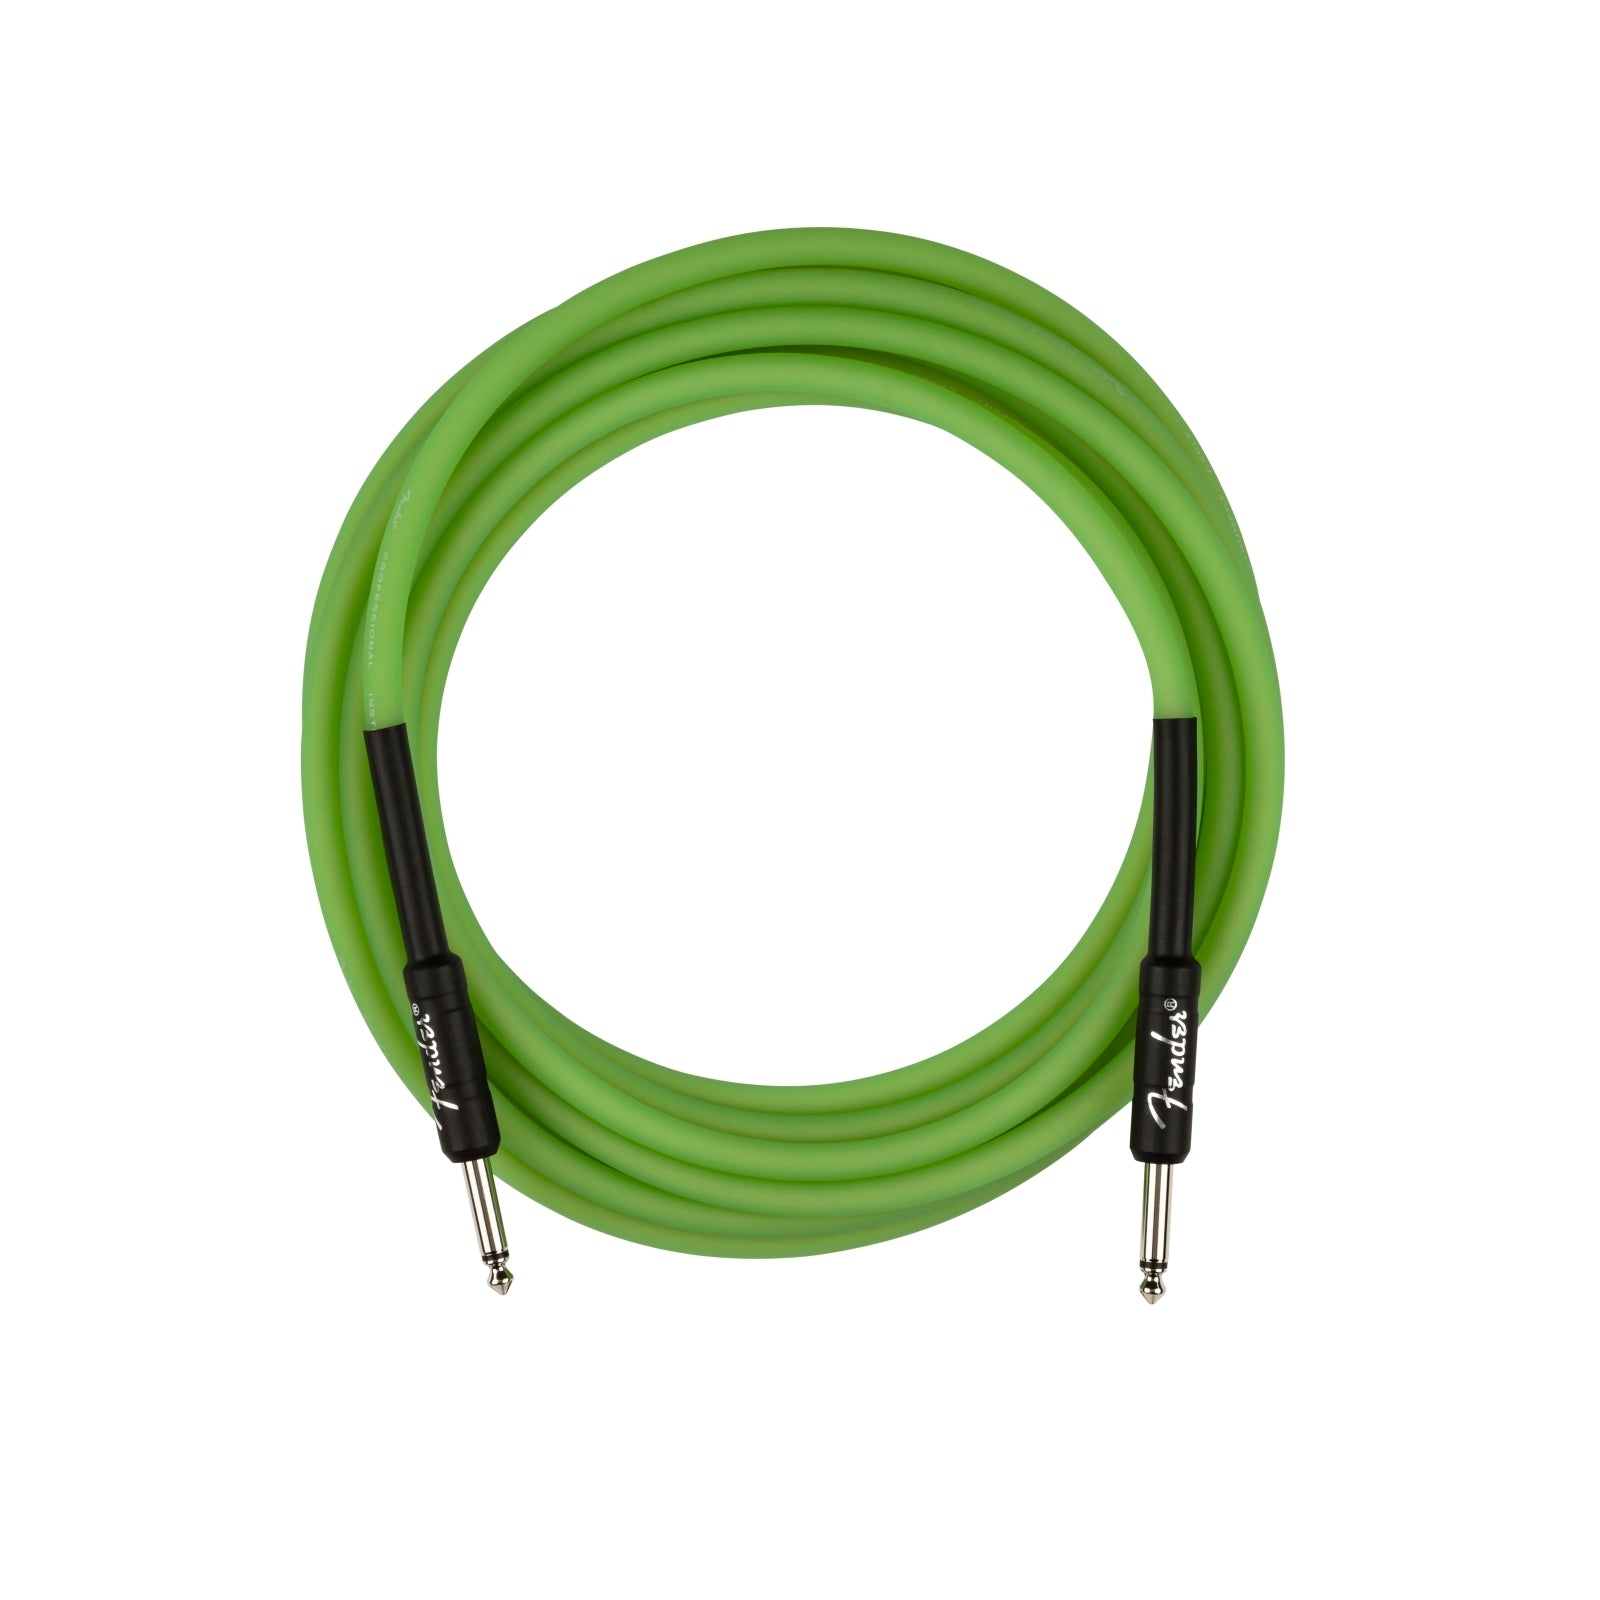 Fender Professional Series 18.6' Instrument Cable Glow In The Dark - Green